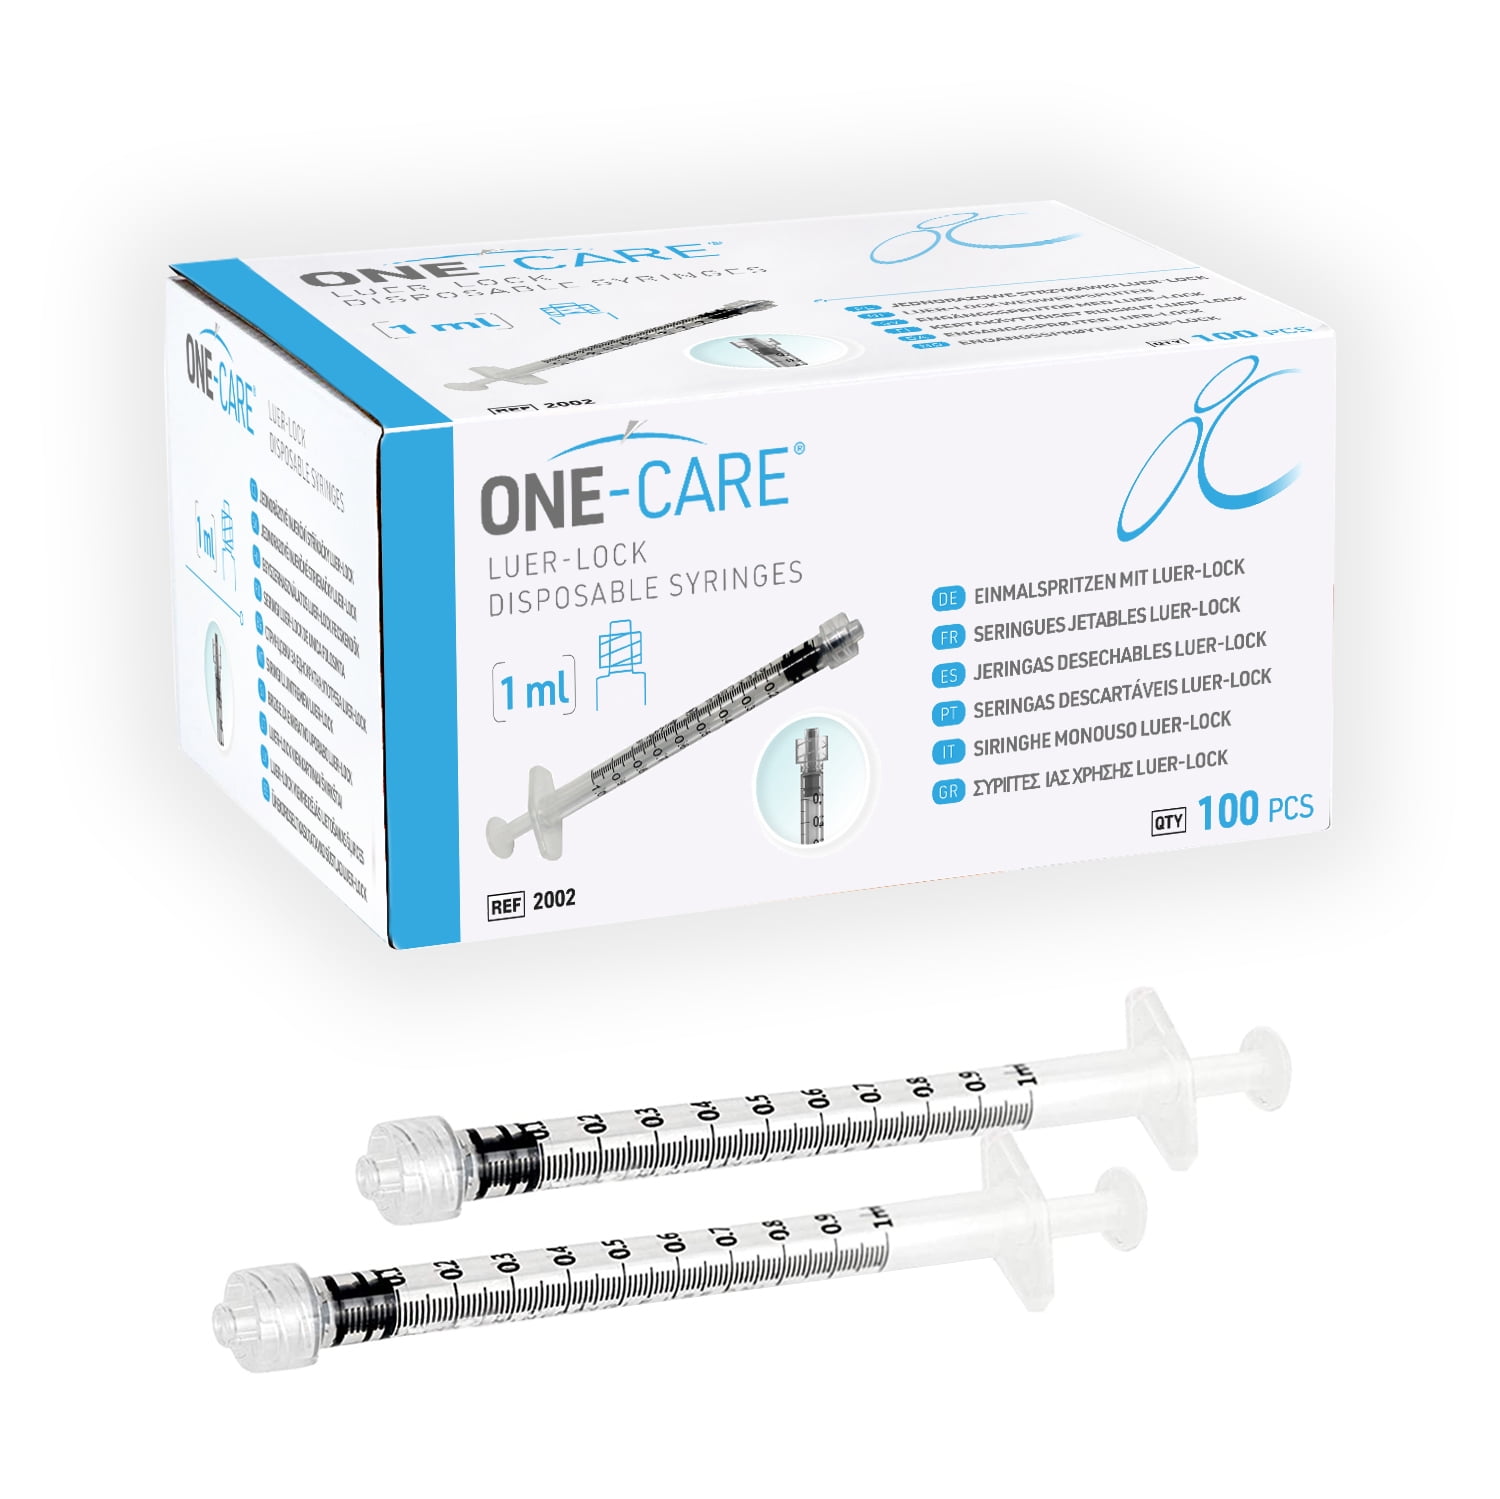 1ml Disposable Luer Lock Syringes with 25G 1 Inch Needle Individual Package  - Pack of 100